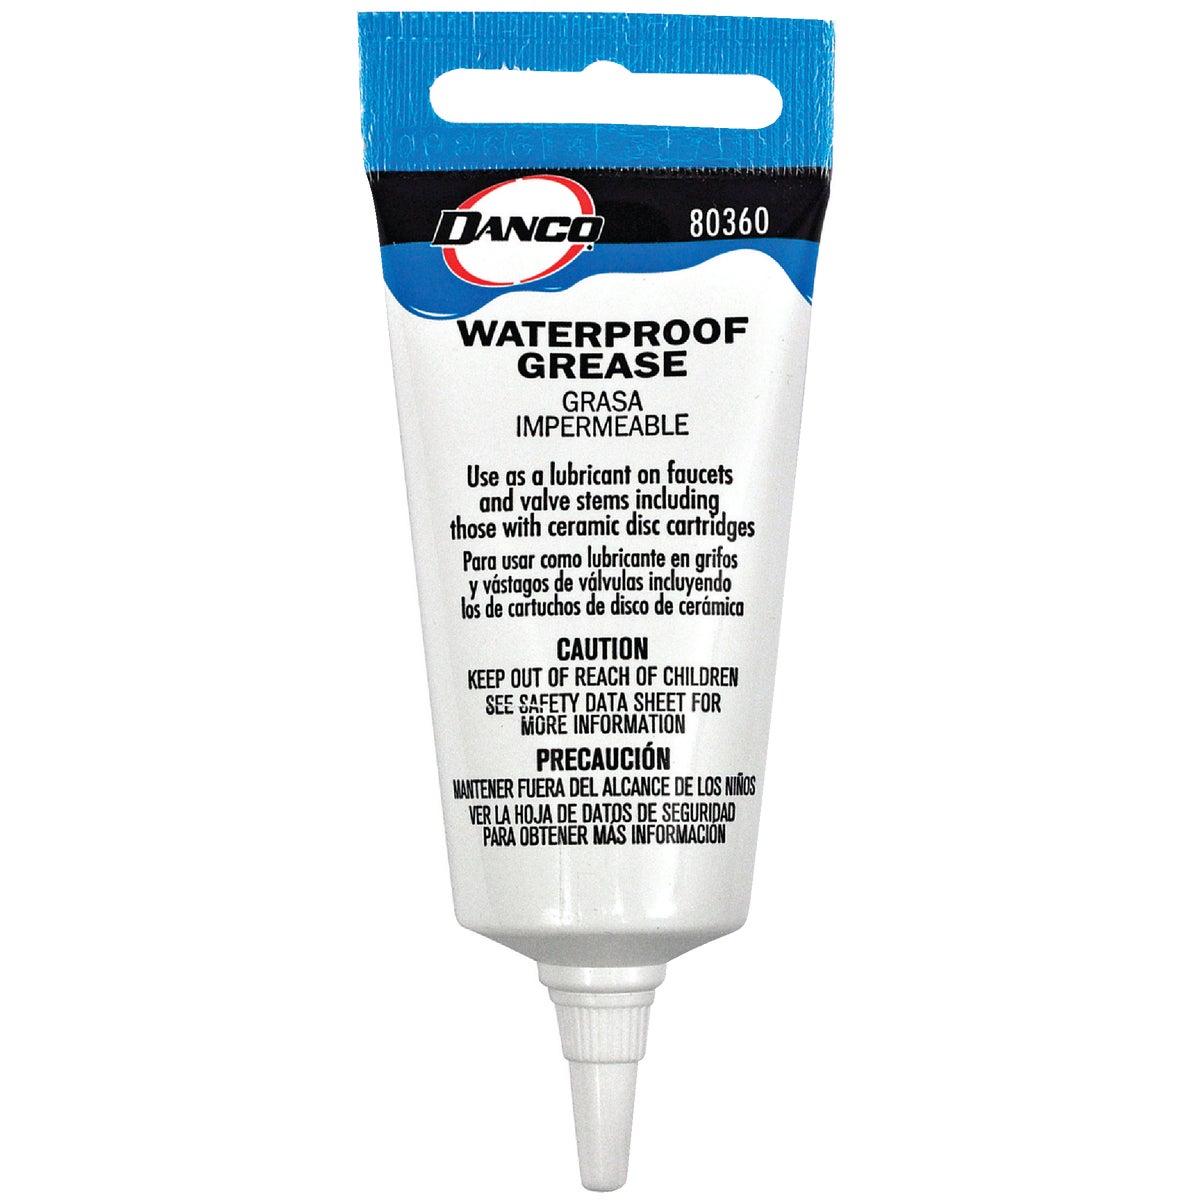 Item 410675, The Danco Waterproof Grease is designed for use as a lubricant for faucets 